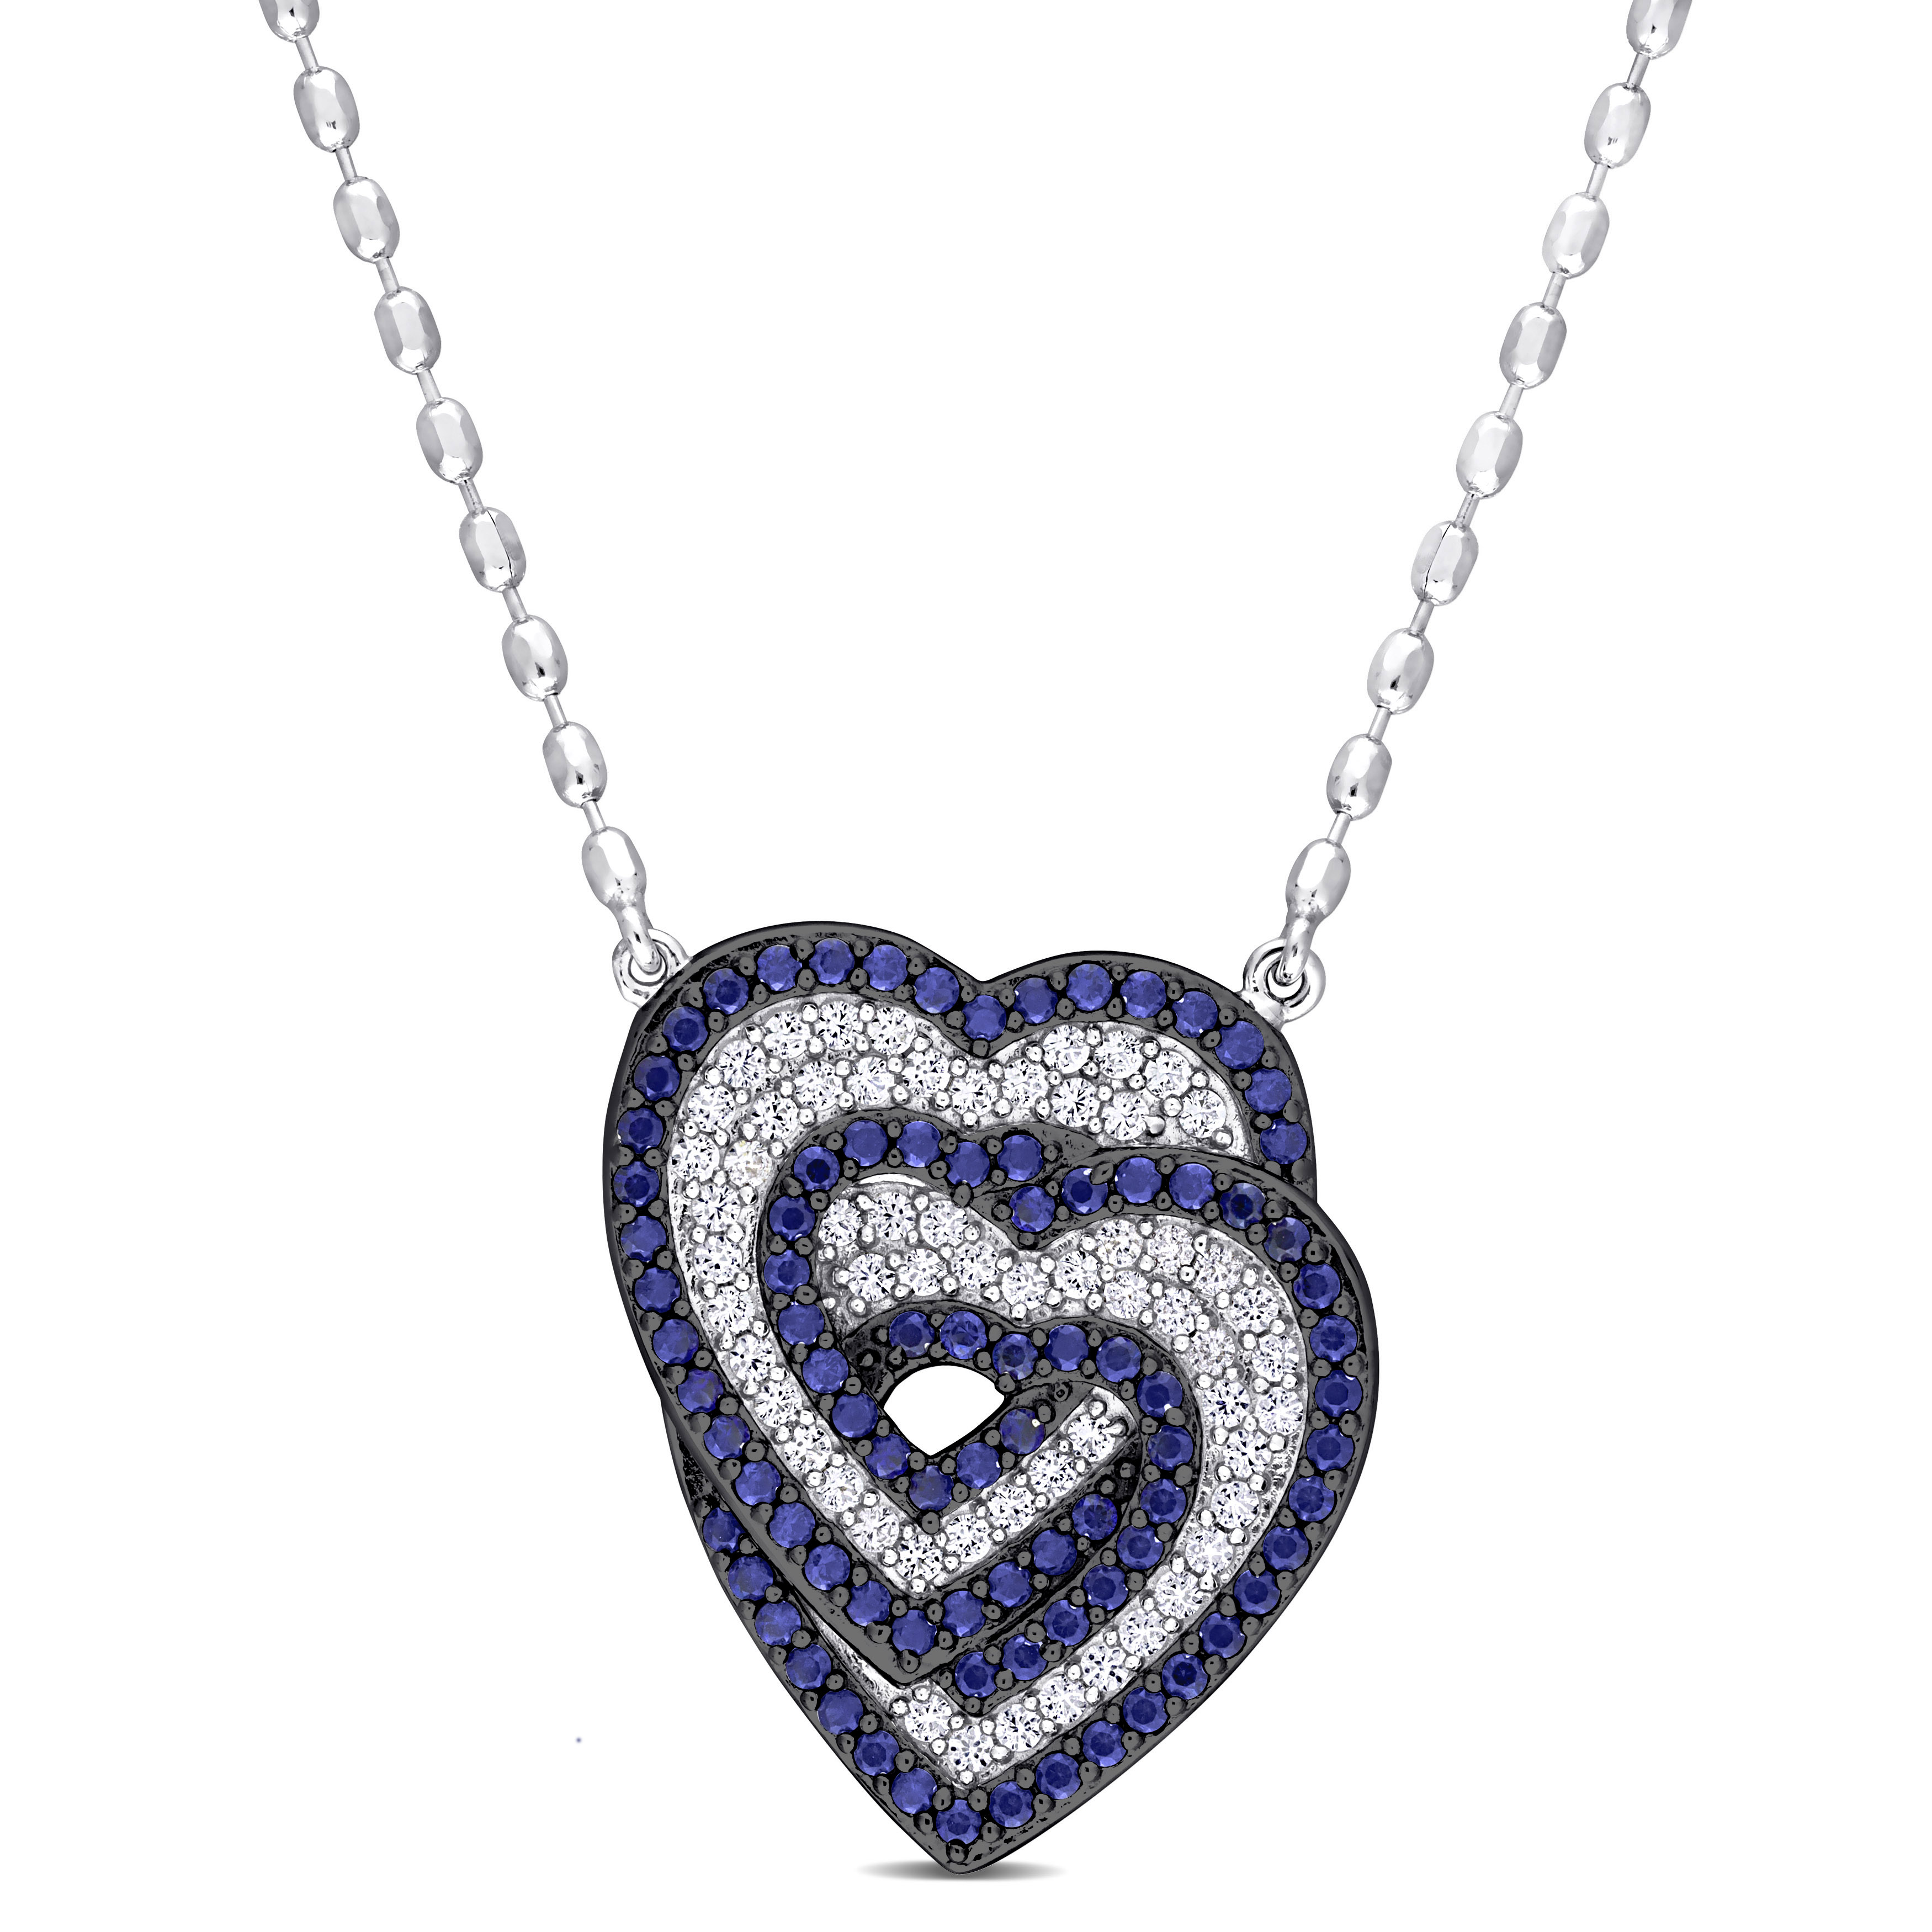 1 2/5 CT TGW Created White Sapphire and Created Blue Sapphire Heart Interlocking Hearts Pendant with Chain in Sterling Silver - 17 in.